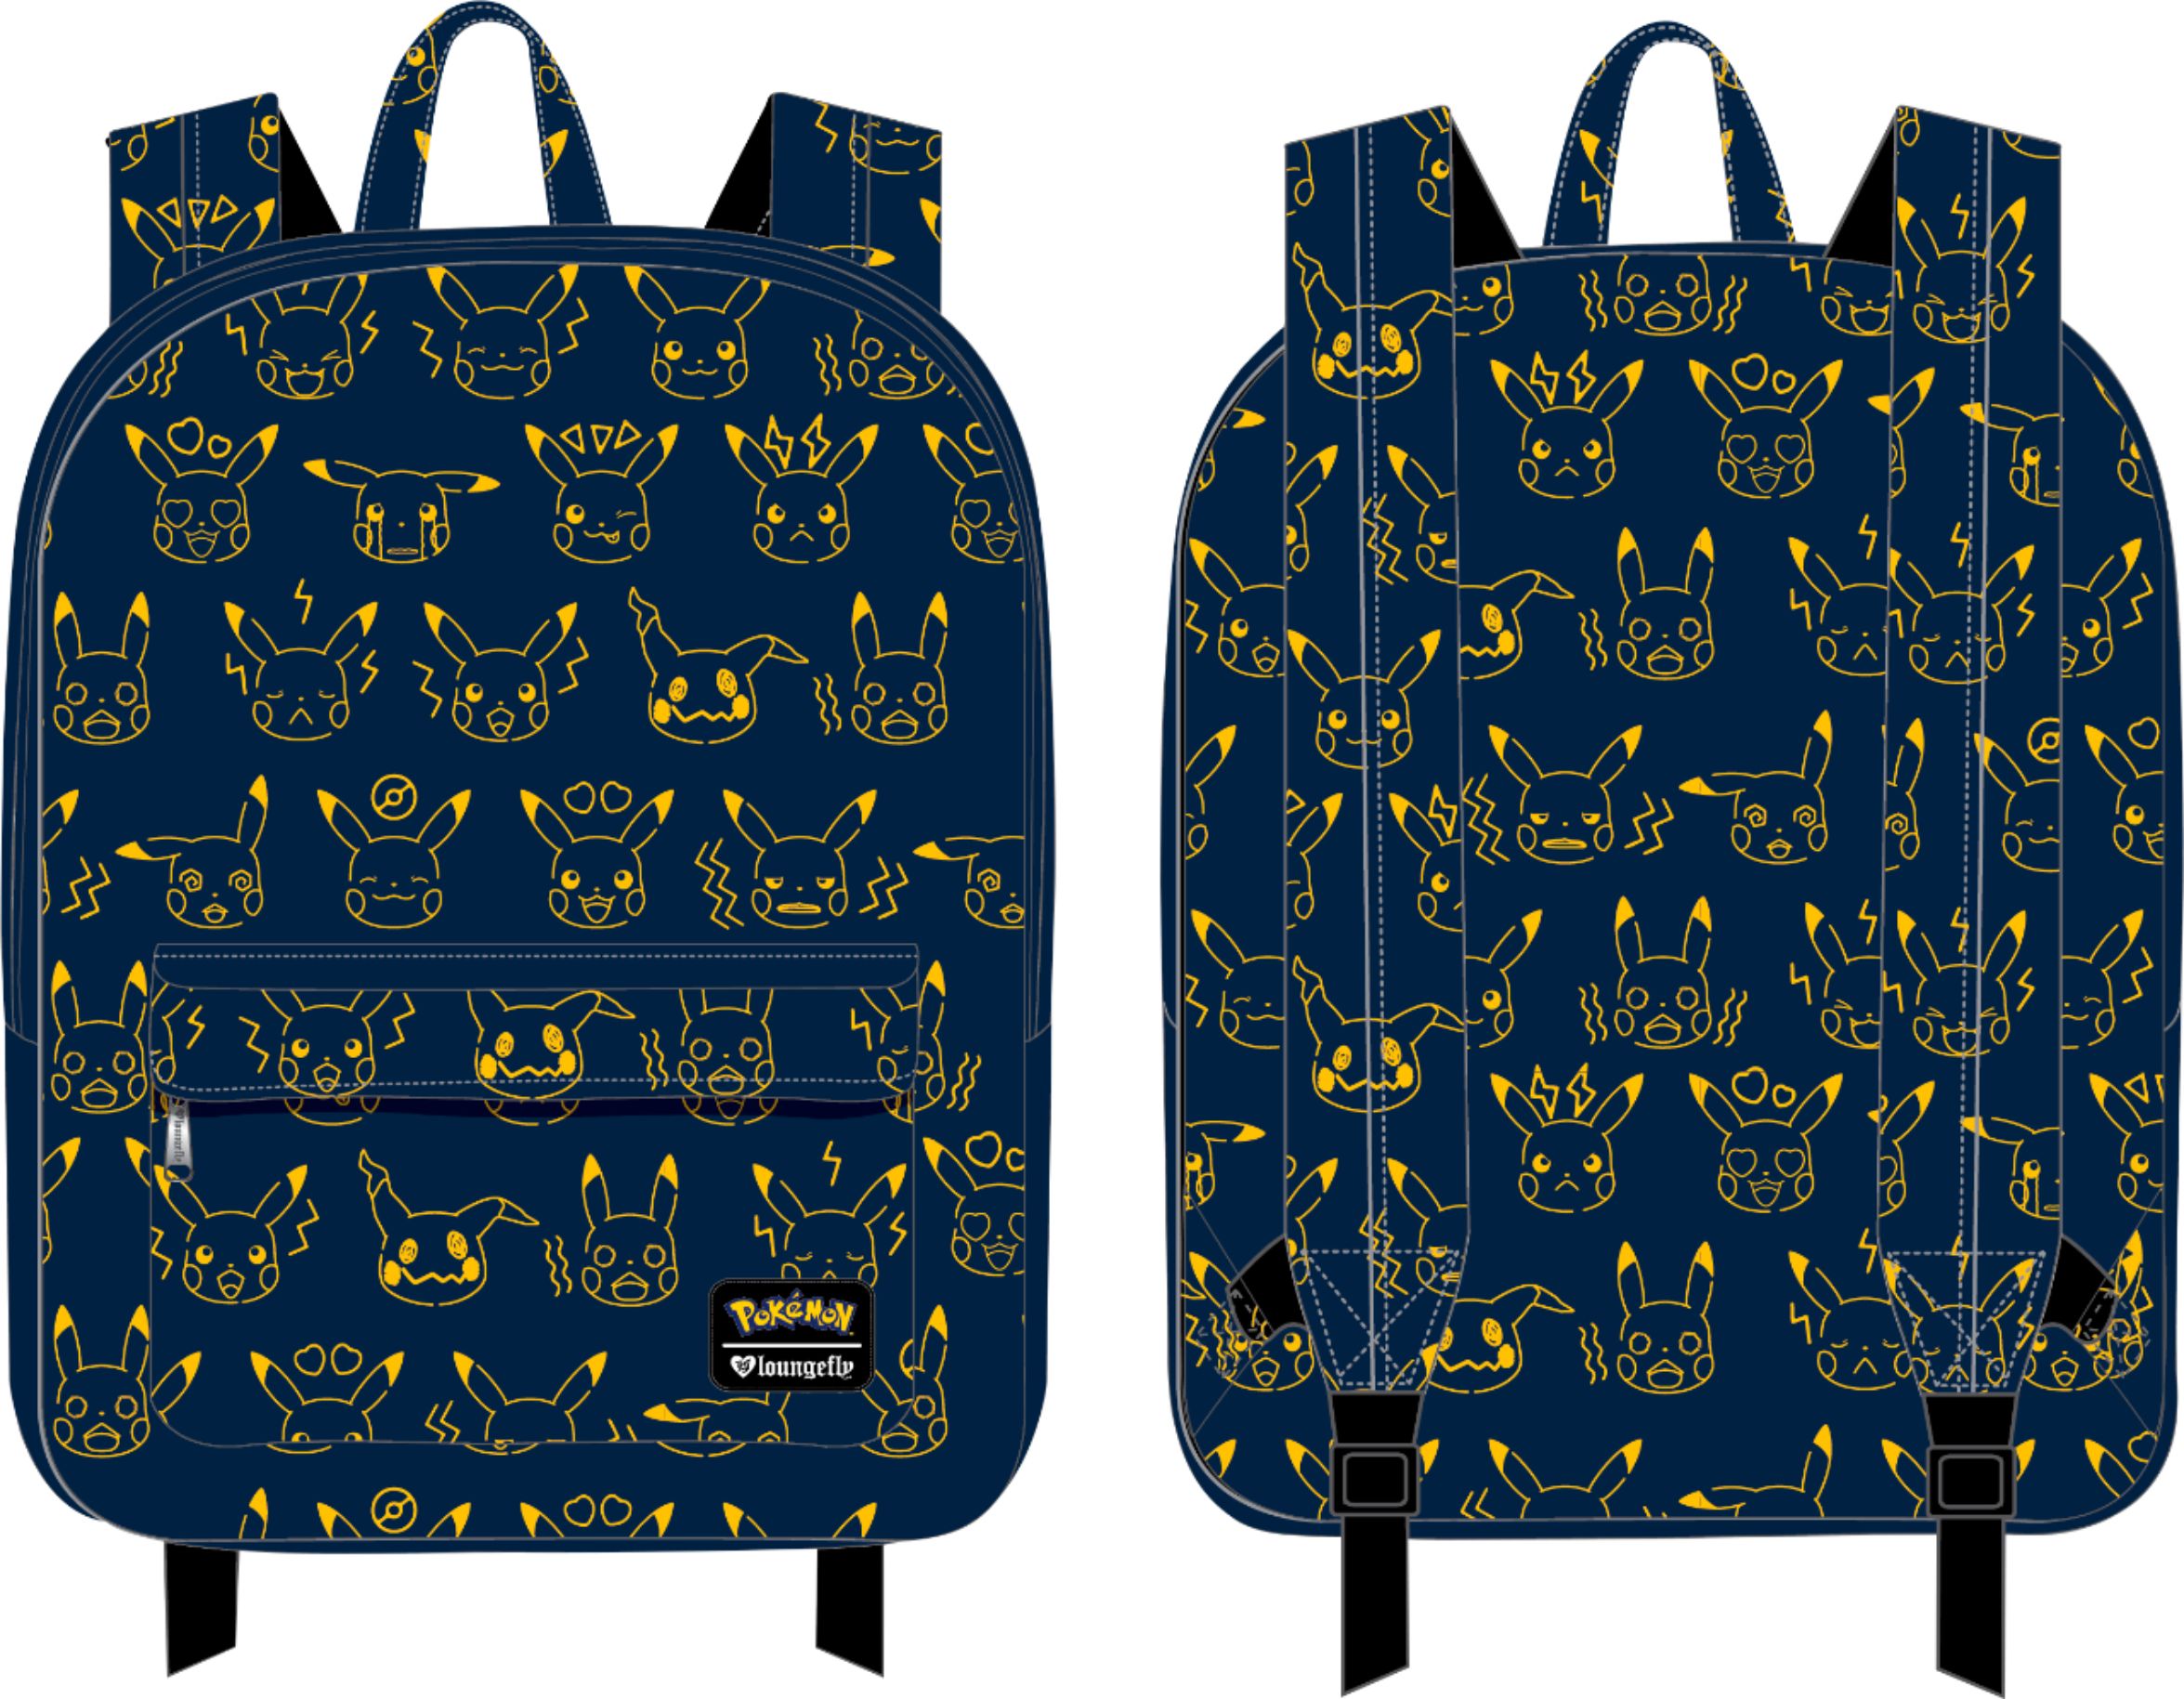 LoungeFly - Pikachu Expressions Backpack - Multicolor